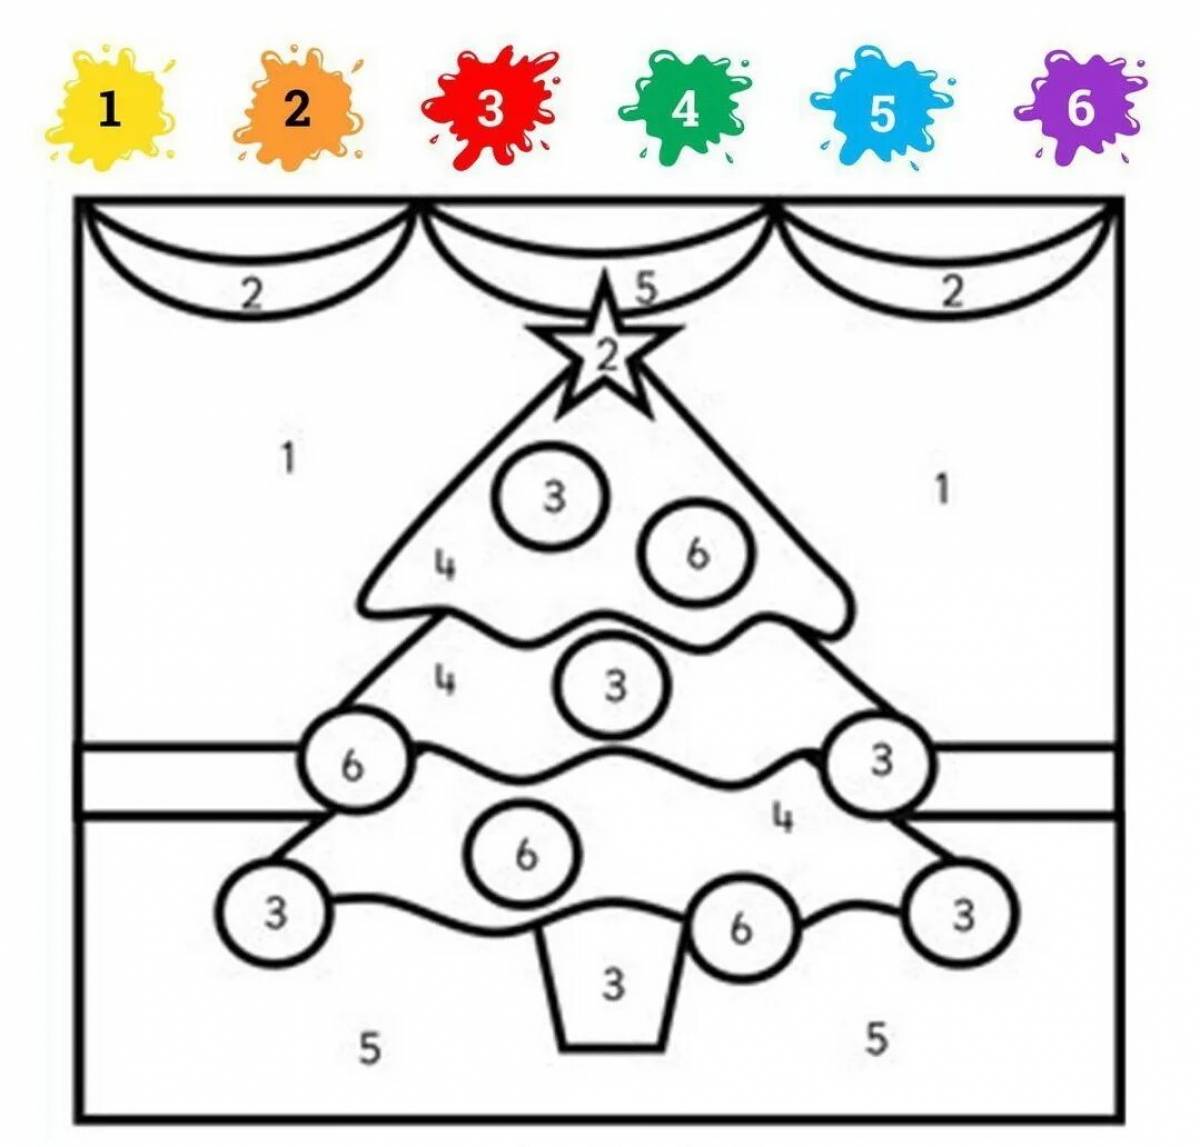 Christmas tree by numbers #7